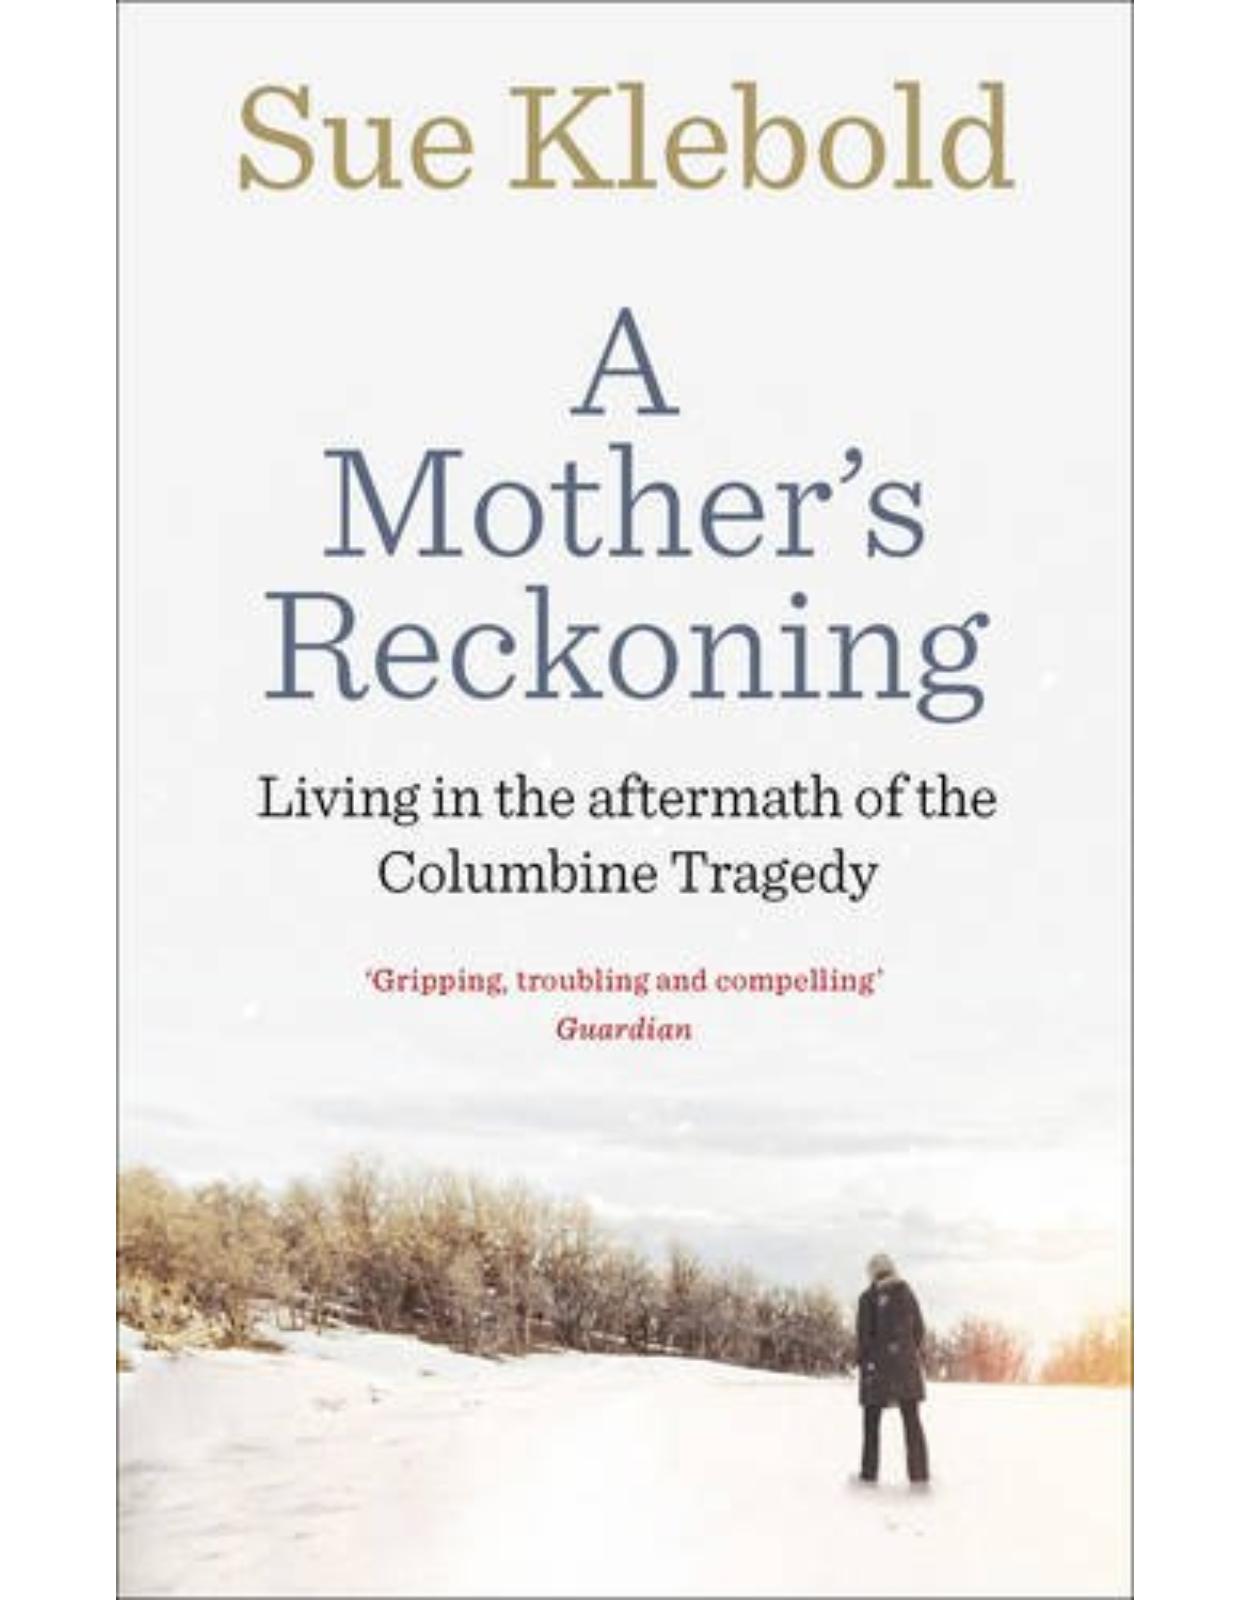 A Mother's Reckoning: Living in the aftermath of the Columbine tragedy